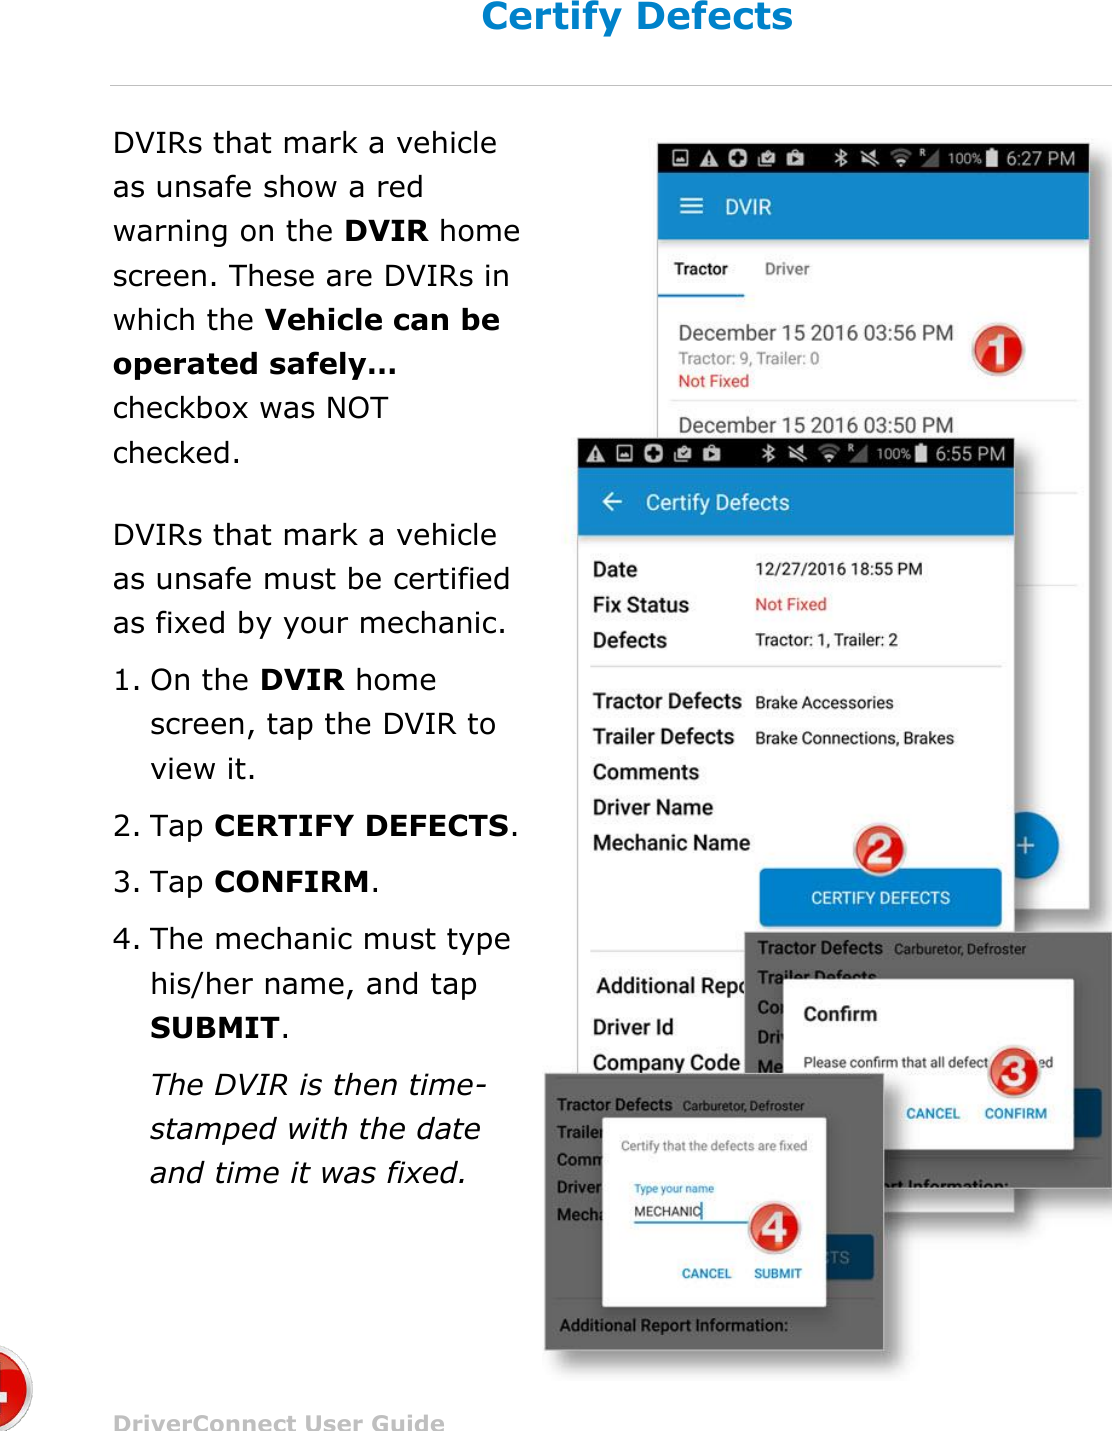 Complete a DVIR DriverConnect User Guide  59 © 2016-2017, Rand McNally, Inc. Certify Defects DVIRs that mark a vehicle as unsafe show a red warning on the DVIR home screen. These are DVIRs in which the Vehicle can be operated safely… checkbox was NOT checked. DVIRs that mark a vehicle as unsafe must be certified as fixed by your mechanic. 1. On the DVIR home screen, tap the DVIR to view it. 2. Tap CERTIFY DEFECTS. 3. Tap CONFIRM. 4. The mechanic must type his/her name, and tap SUBMIT. The DVIR is then time-stamped with the date and time it was fixed.  